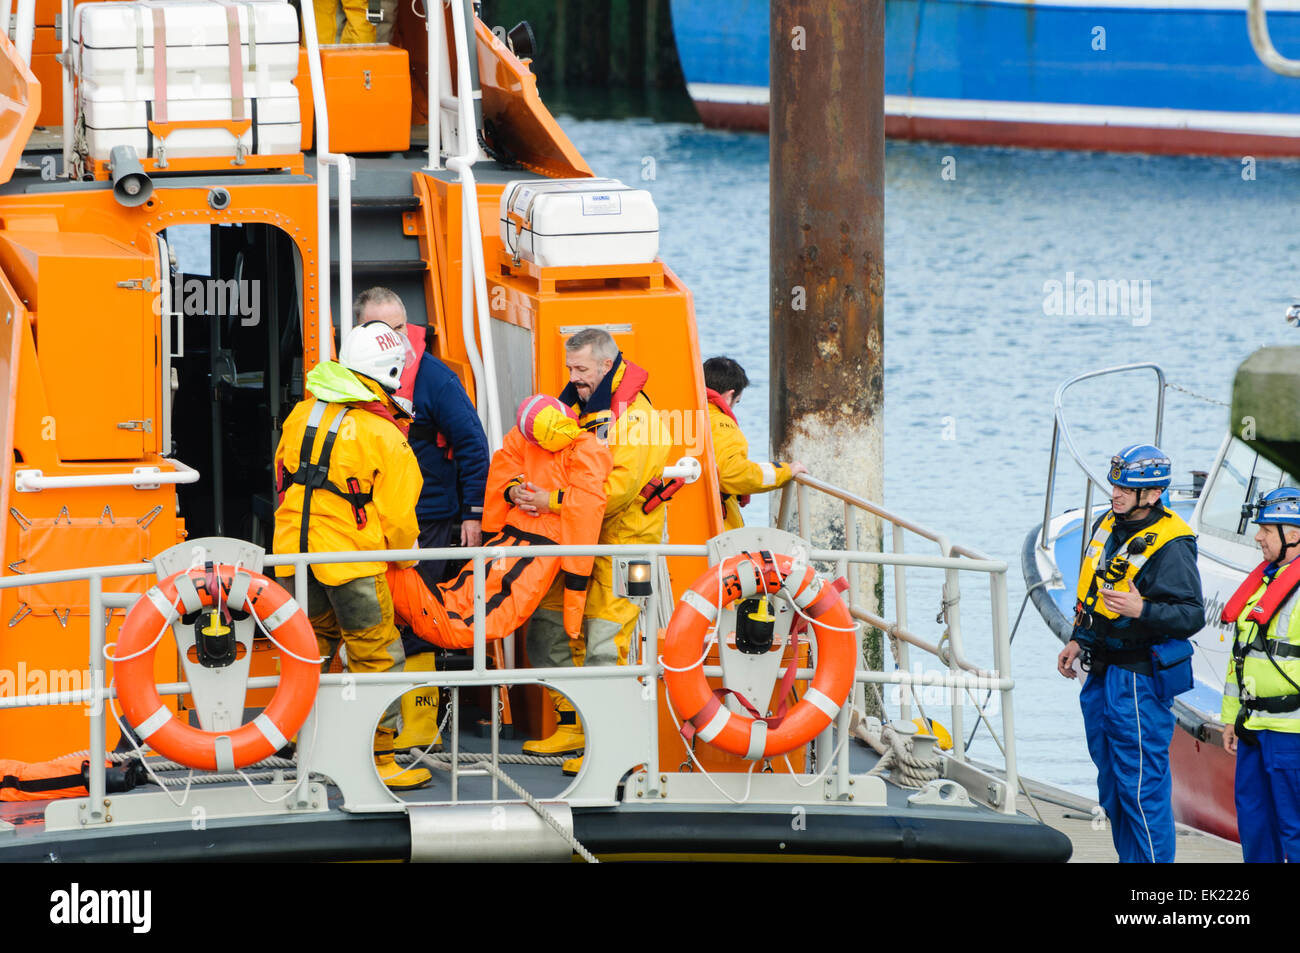 Bangor, County Down. 23/09/2012 - Larne Lifeboat recover a body (dummy) from the sea.  Emergency Services hold 'Operation Diamond', a joint training exercise off the coast of North Down. Stock Photo